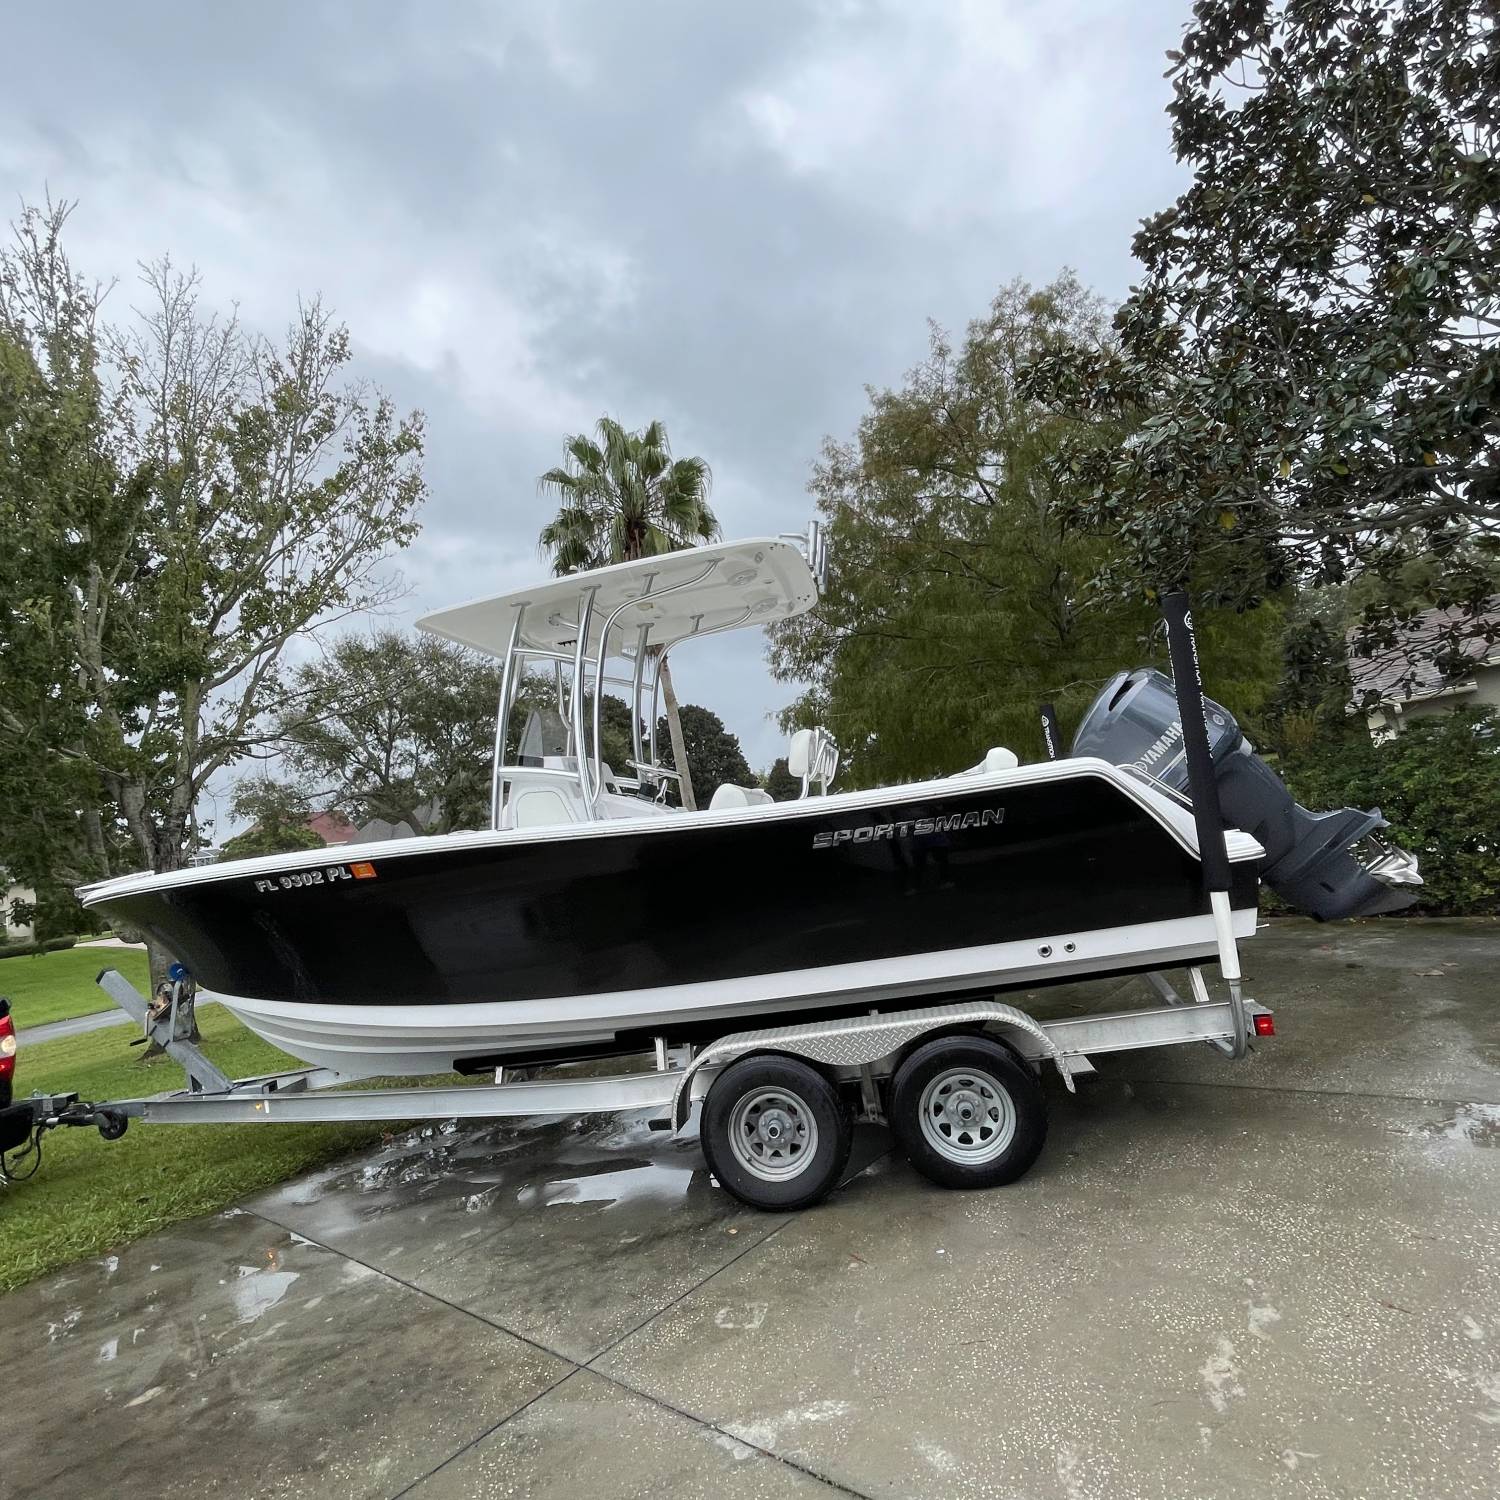 Title: Getting ready for the lake! - On board their Sportsman Heritage 231 Center Console - Location: Montverde, FL. Participating in the Photo Contest #SportsmanApril